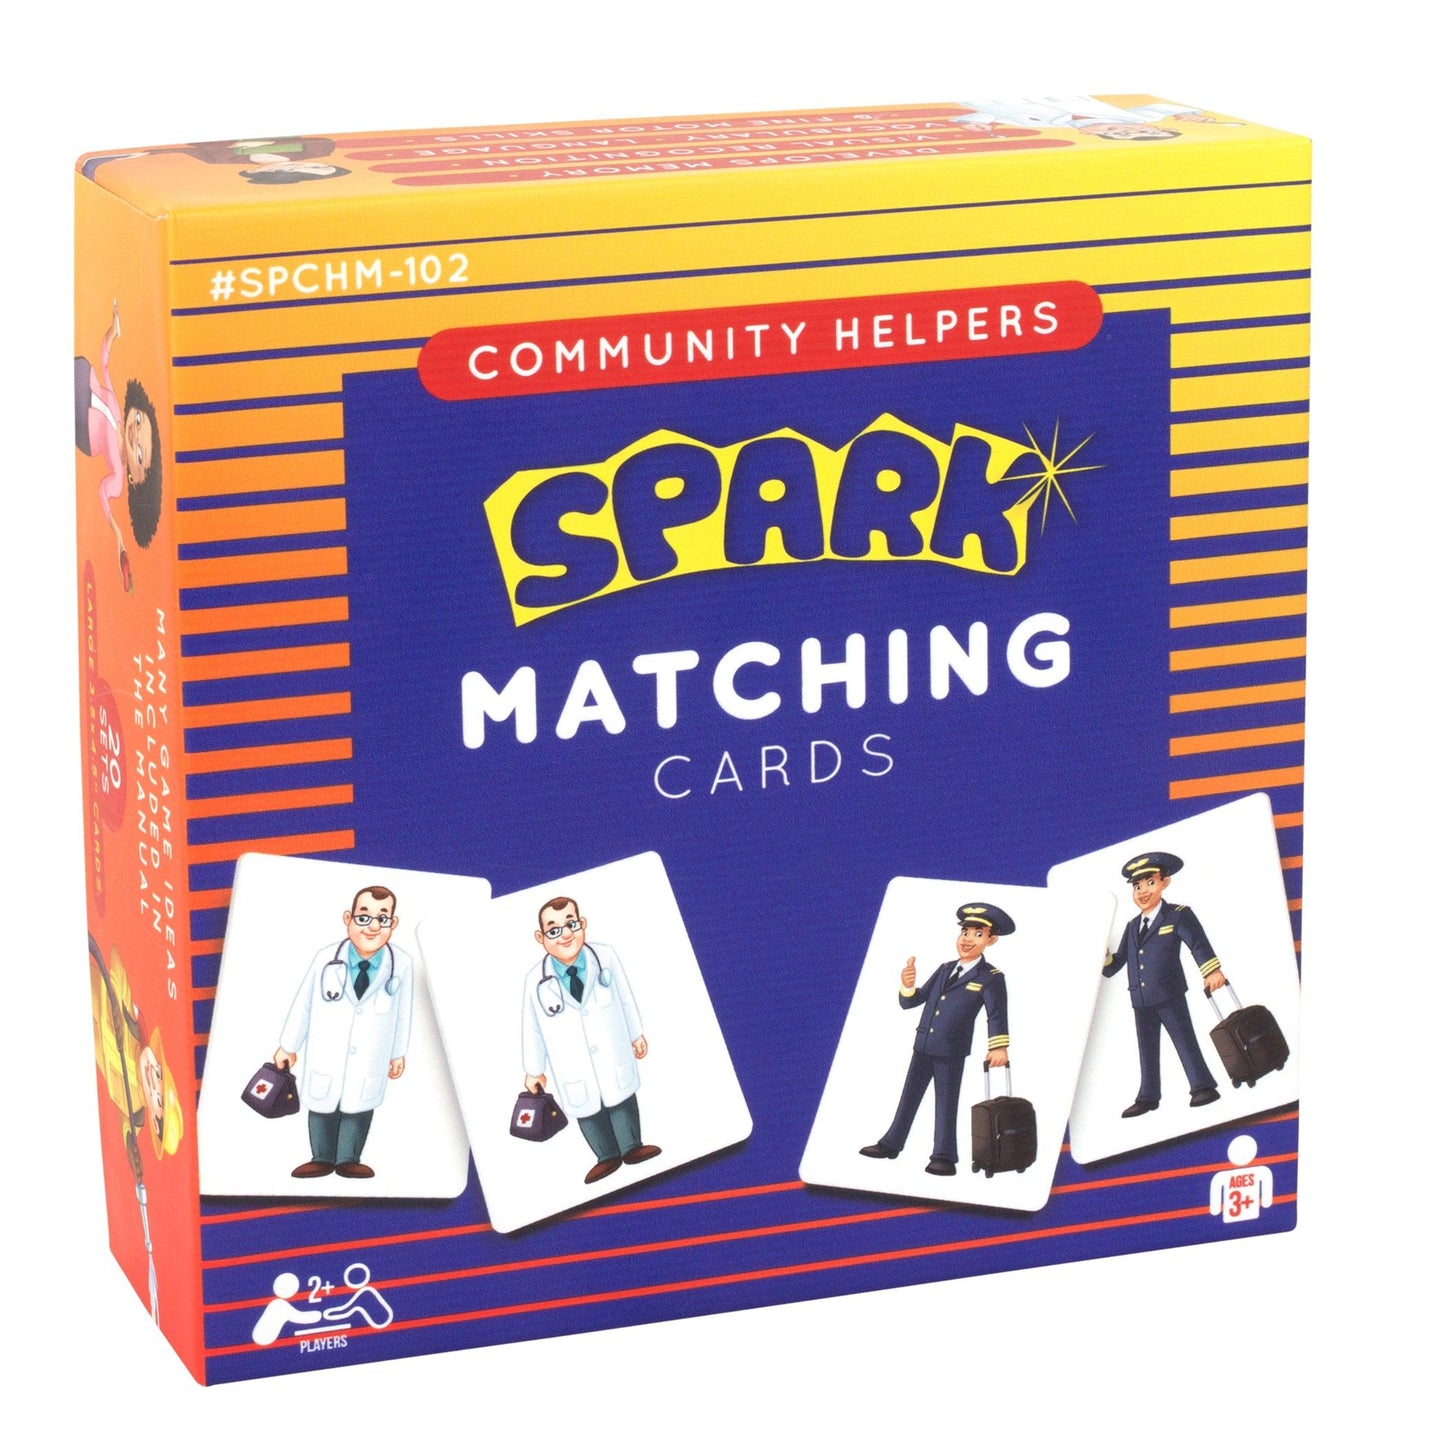 Community Helpers Matching Cards Memory Game - Loomini